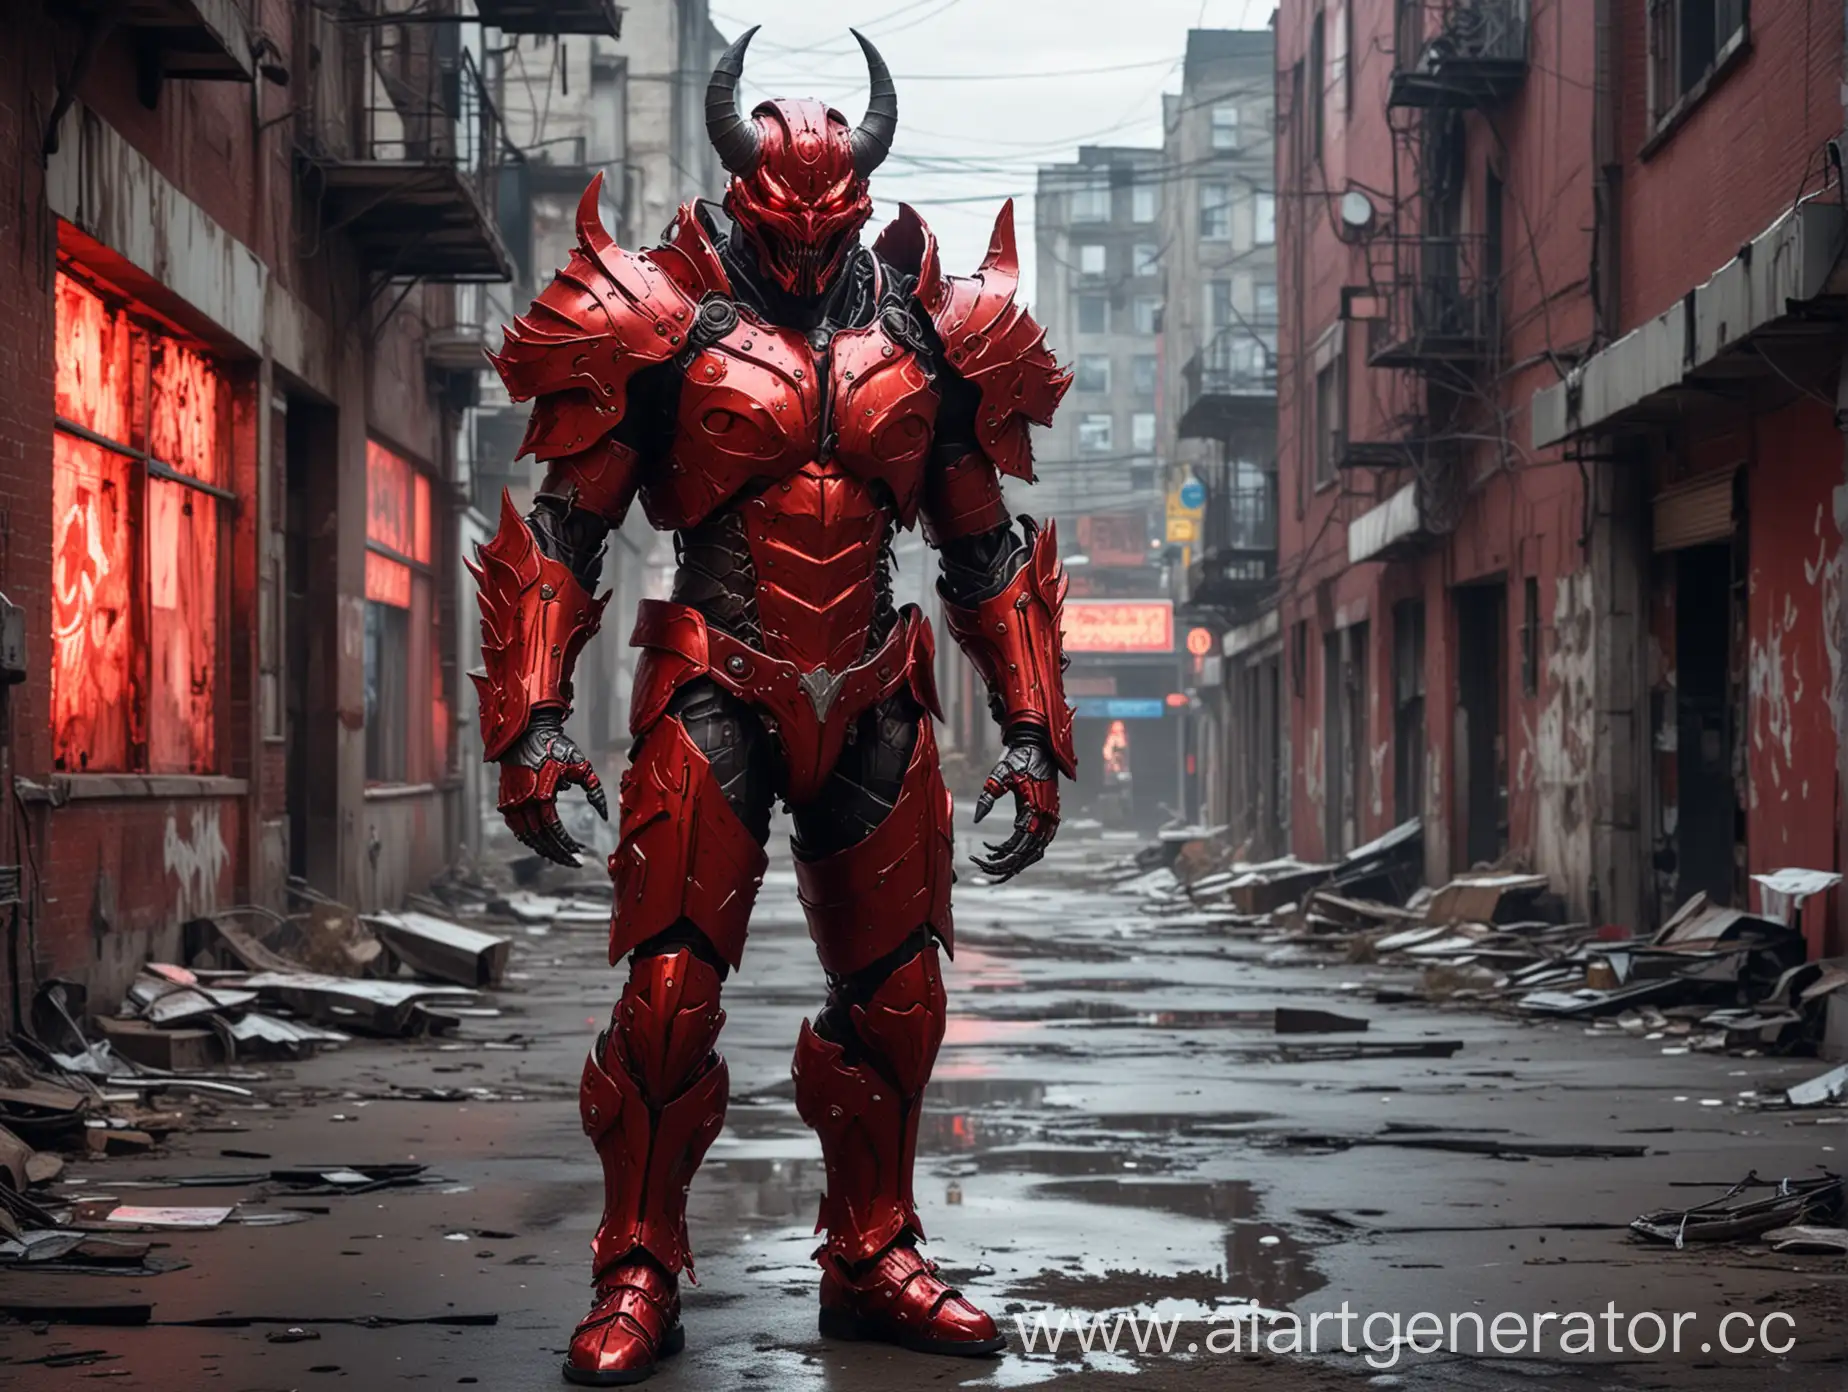 A demon in chrome-plated red armor in a neon abandoned city